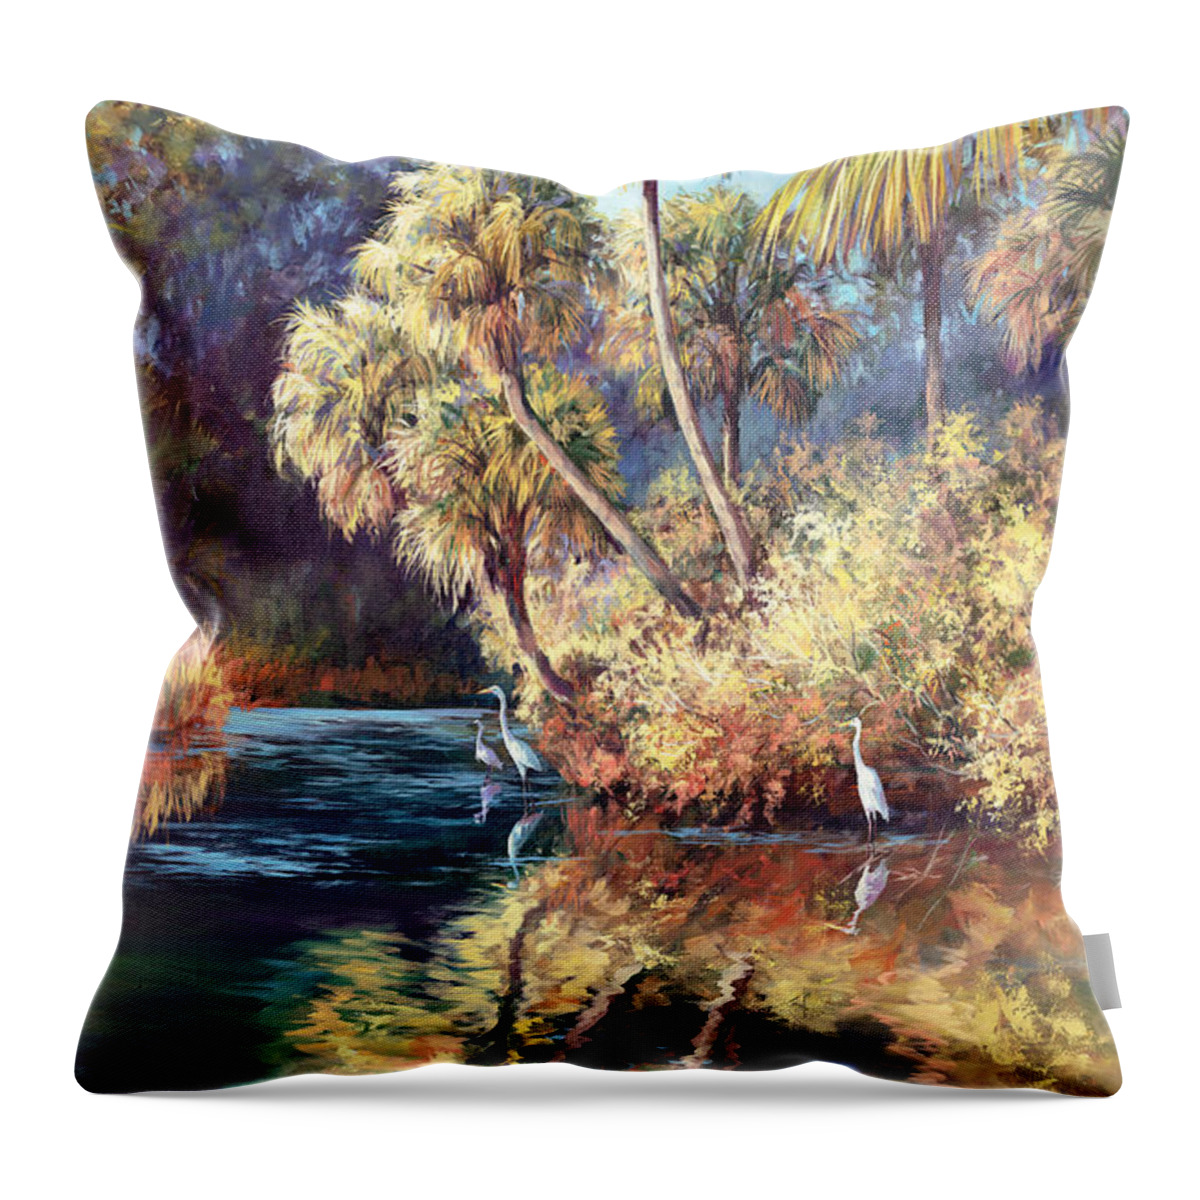 Palm Trees Throw Pillow featuring the painting Palm Tree Cove #1 by Laurie Snow Hein